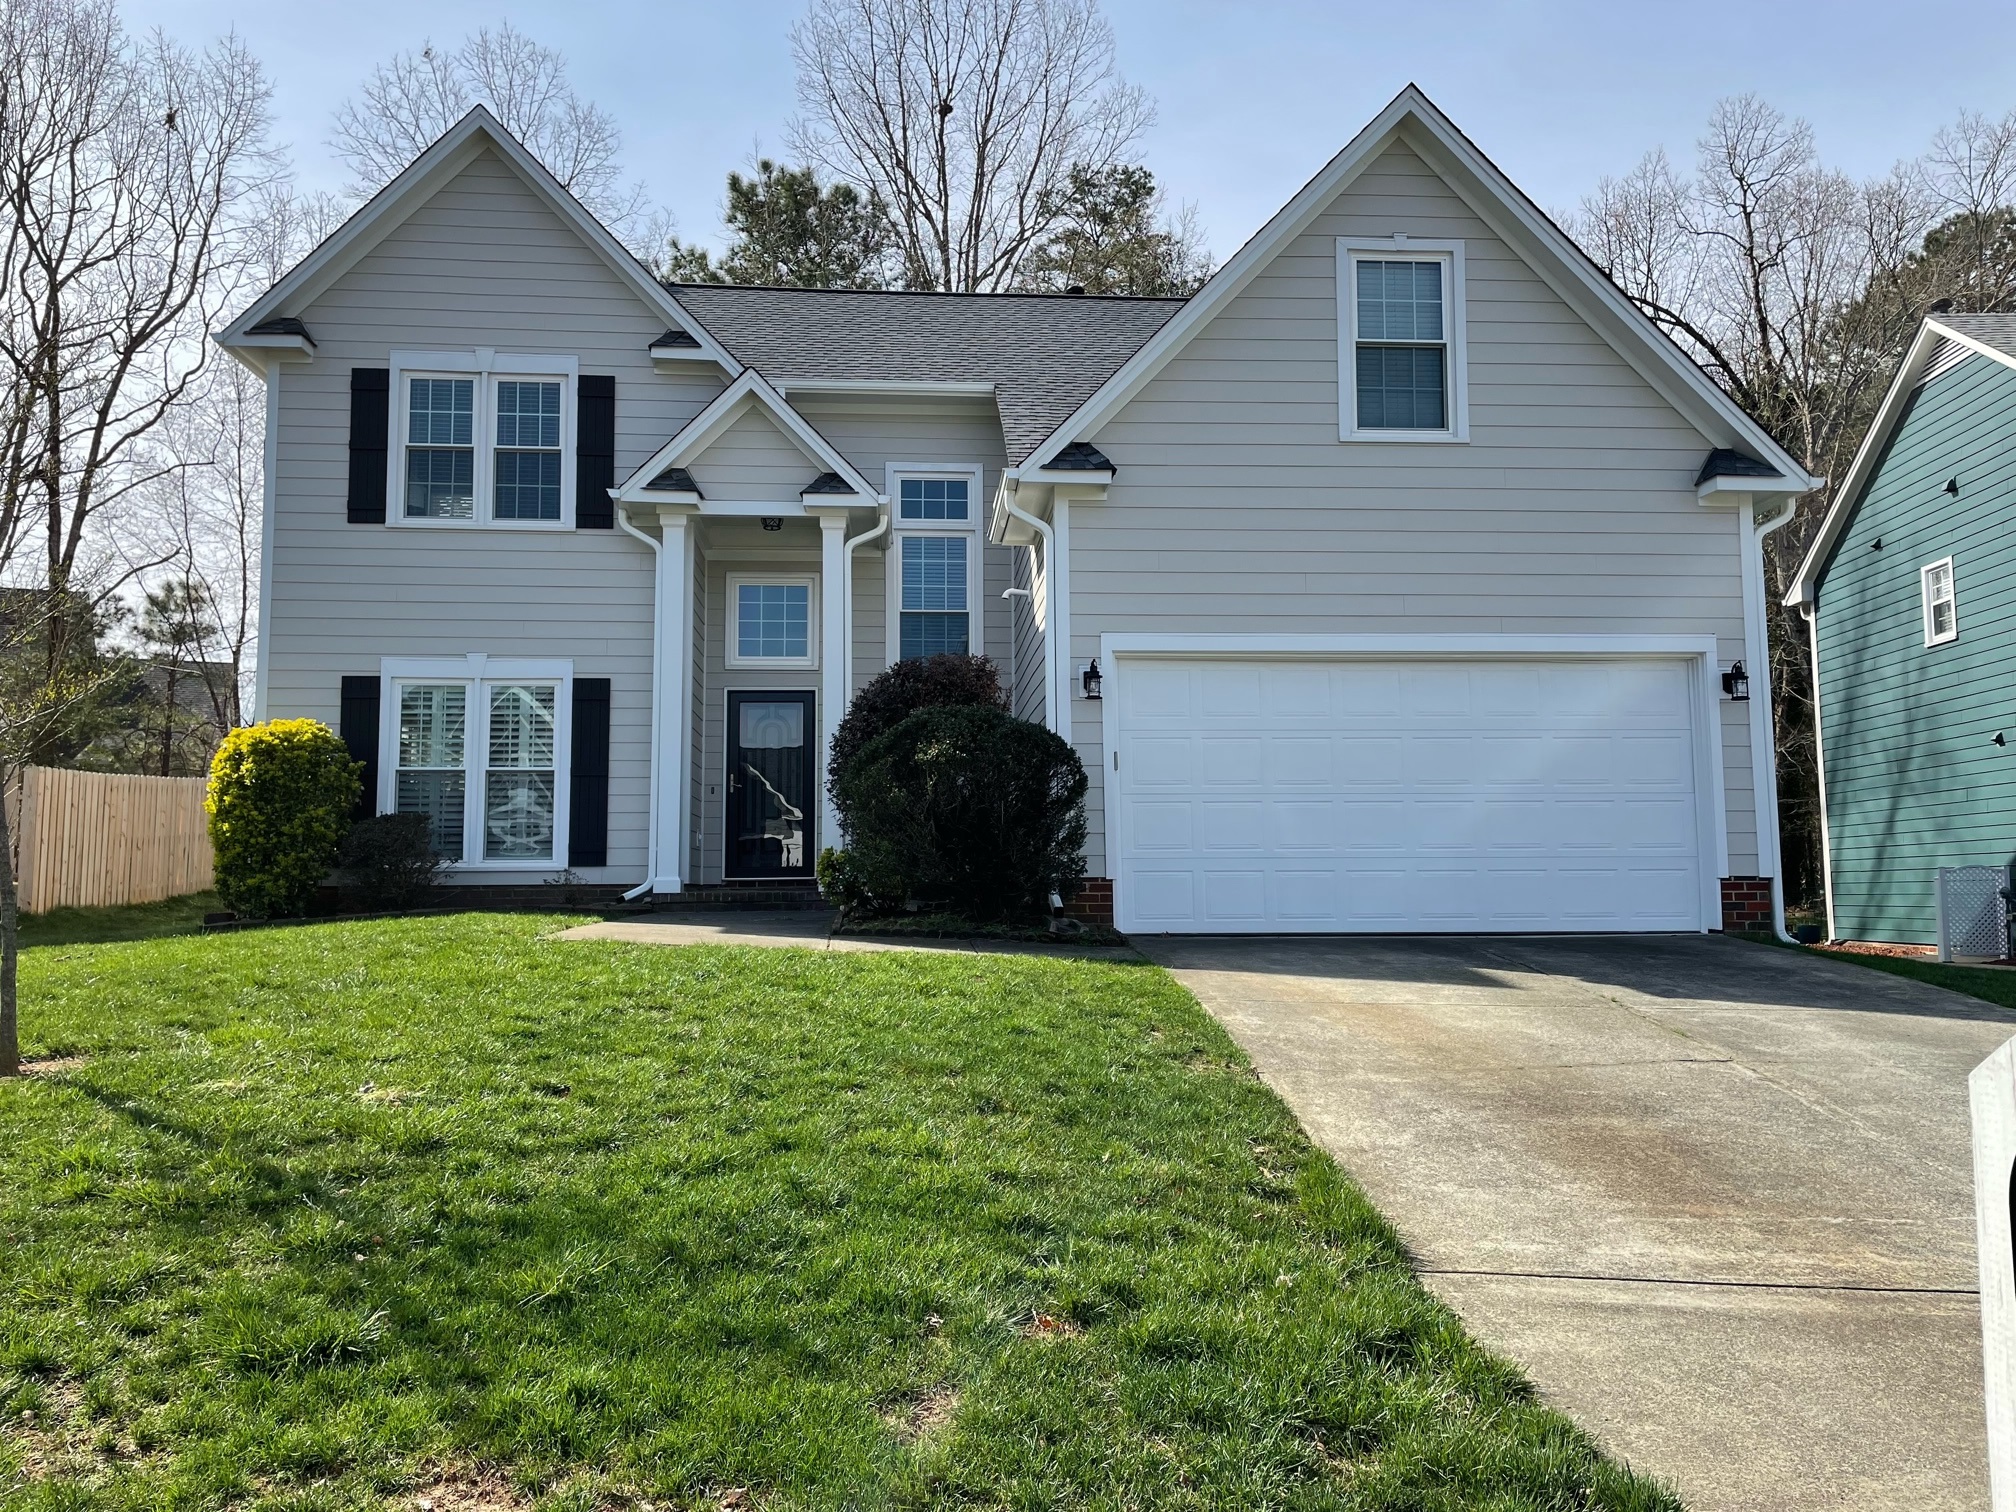 Raleigh, NC James Hardie Siding & Gutter Replacement